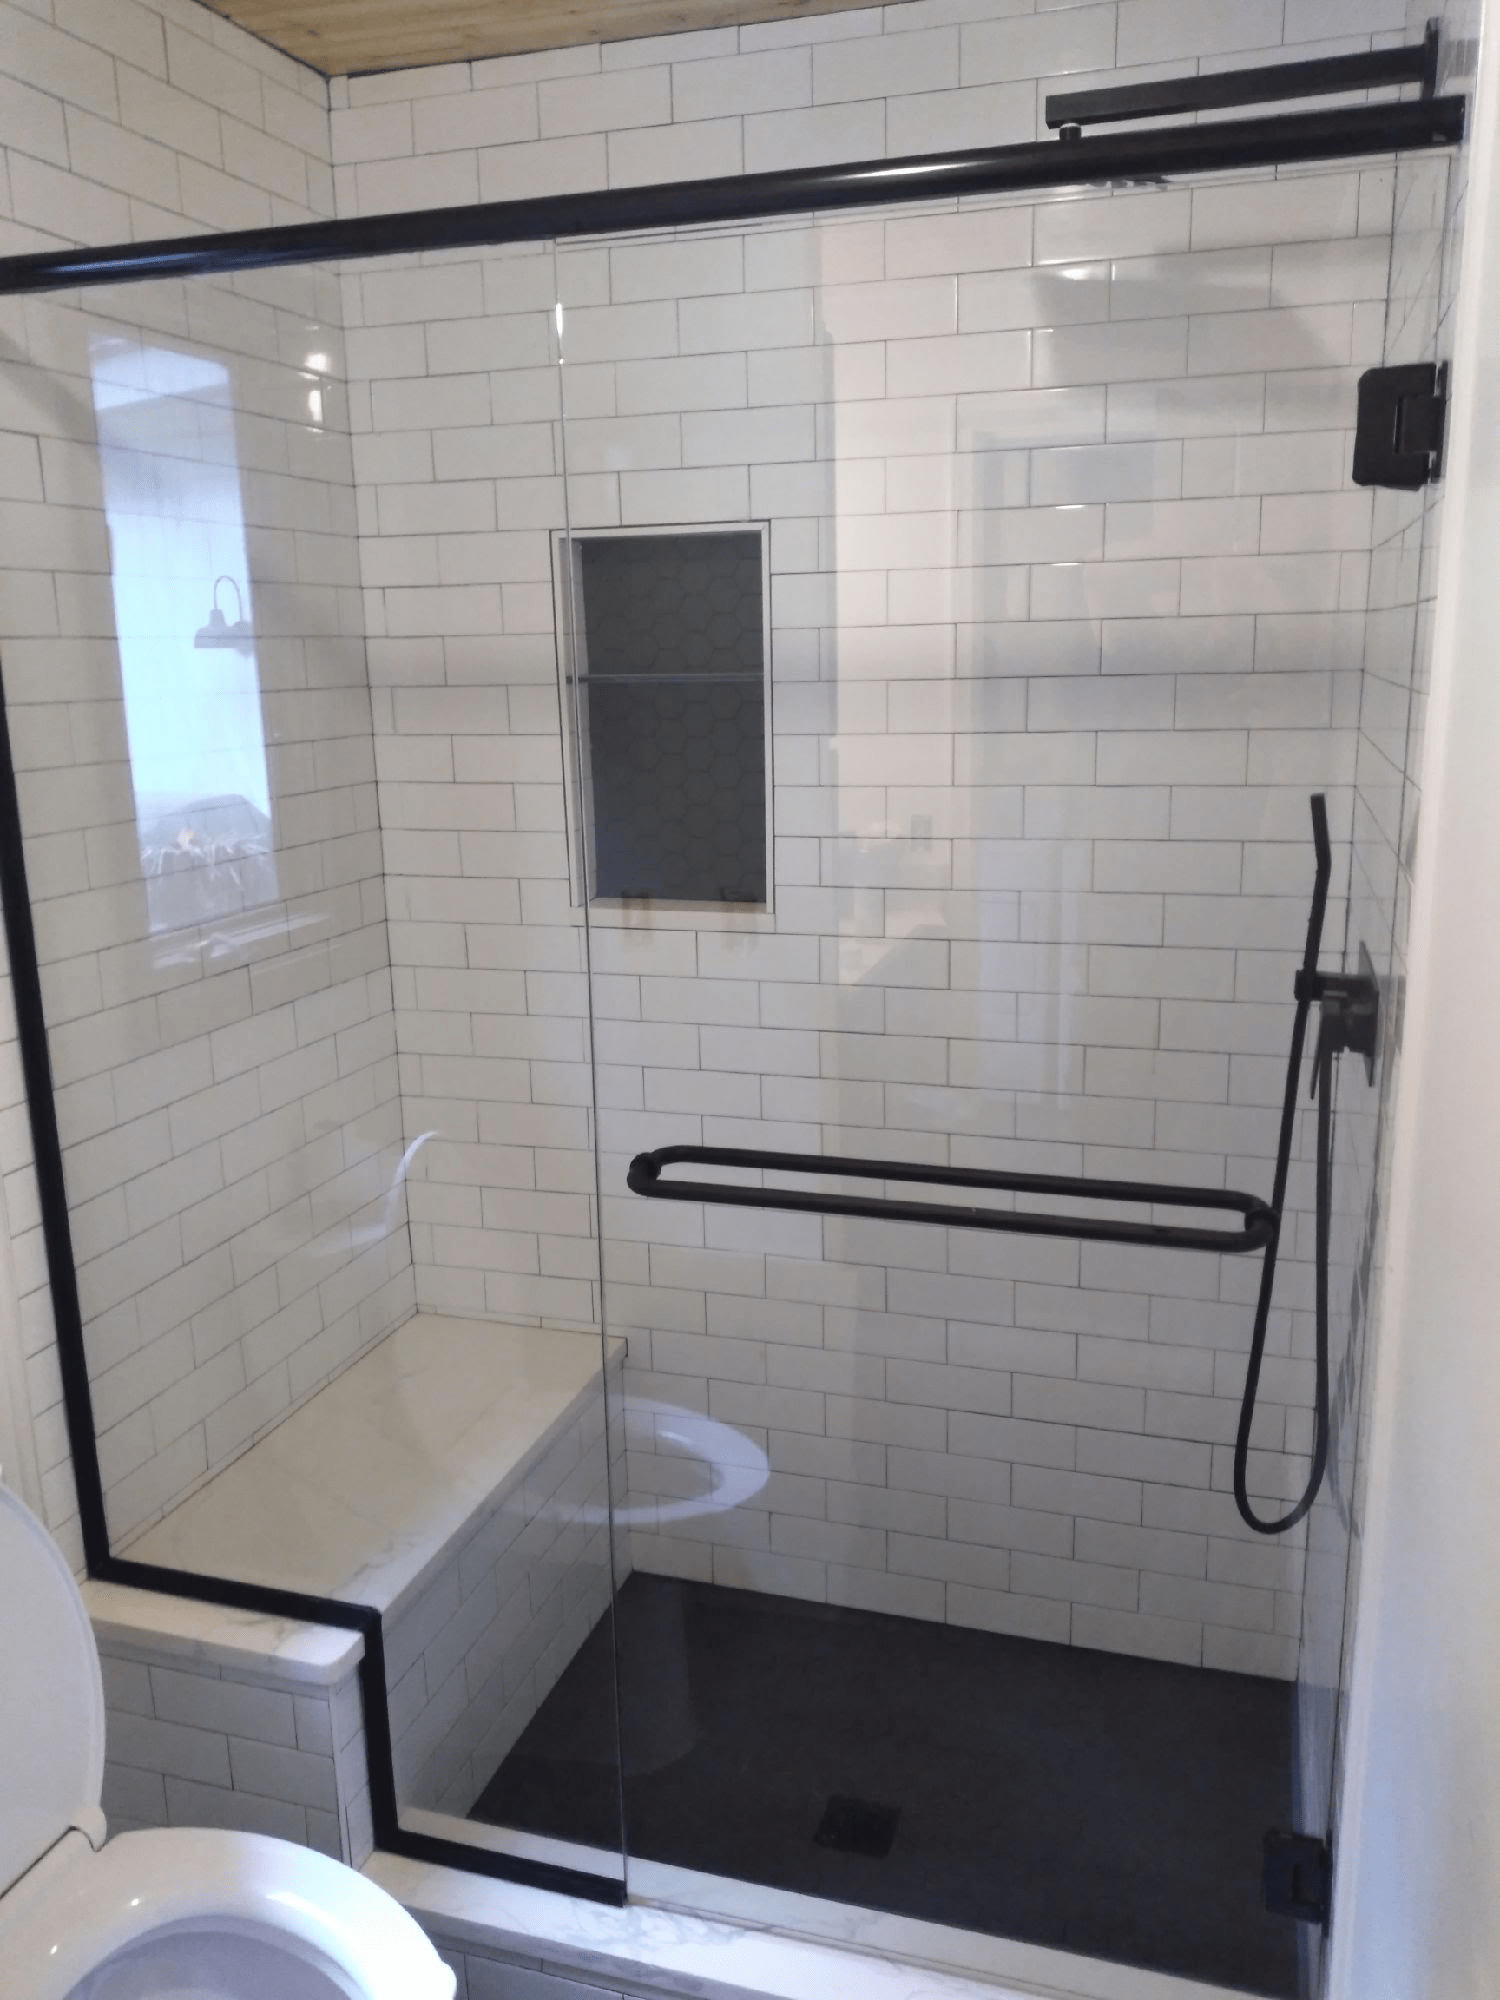 Inspired by a Pinterest post, we designed this shower enclosure to be frameless with matte black channeling for a more modern style.